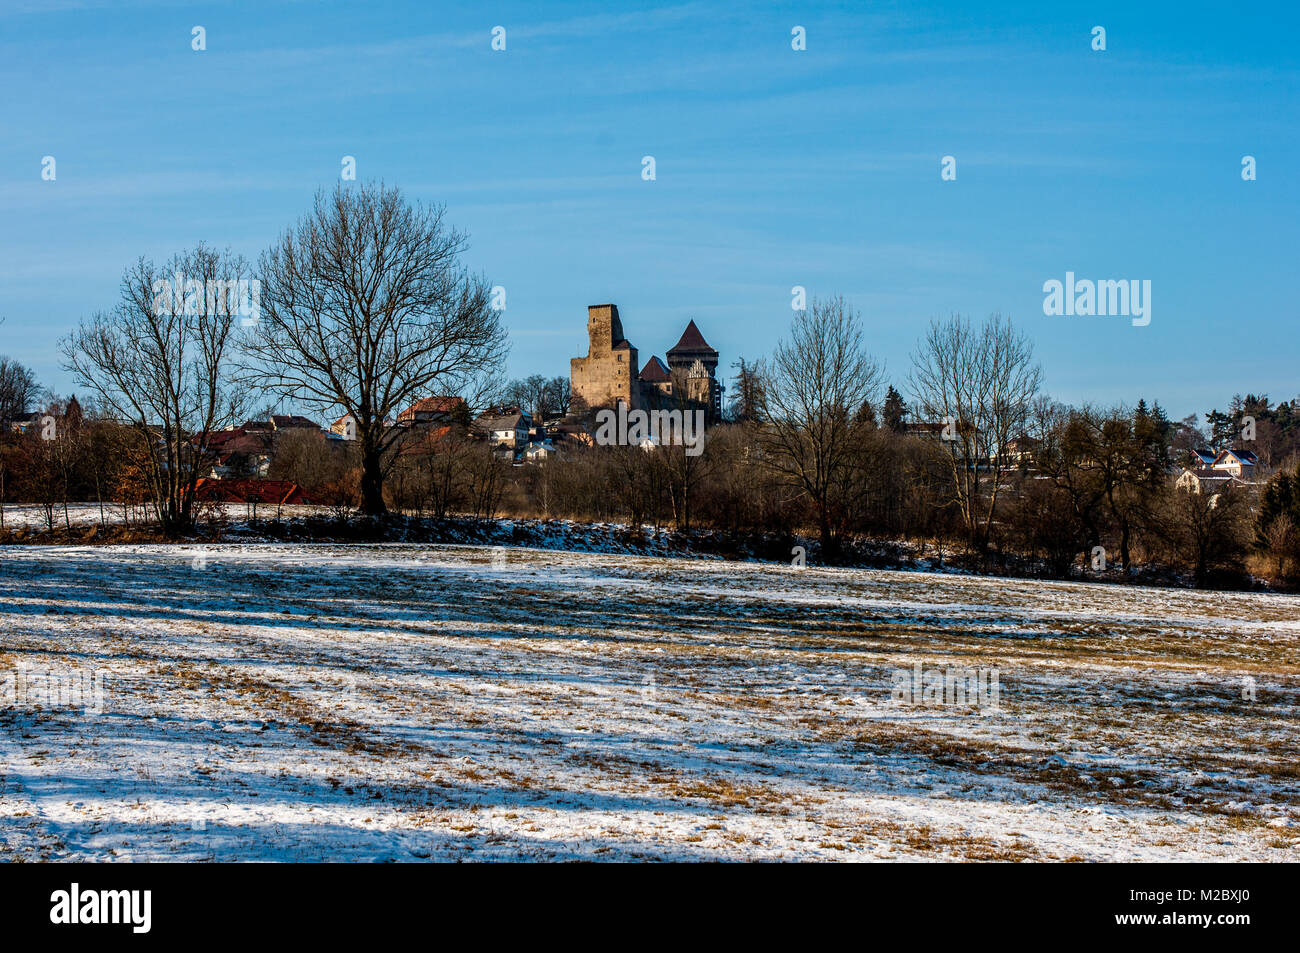 Page 2 - Jaroslav Hasek High Resolution Stock Photography and Images - Alamy